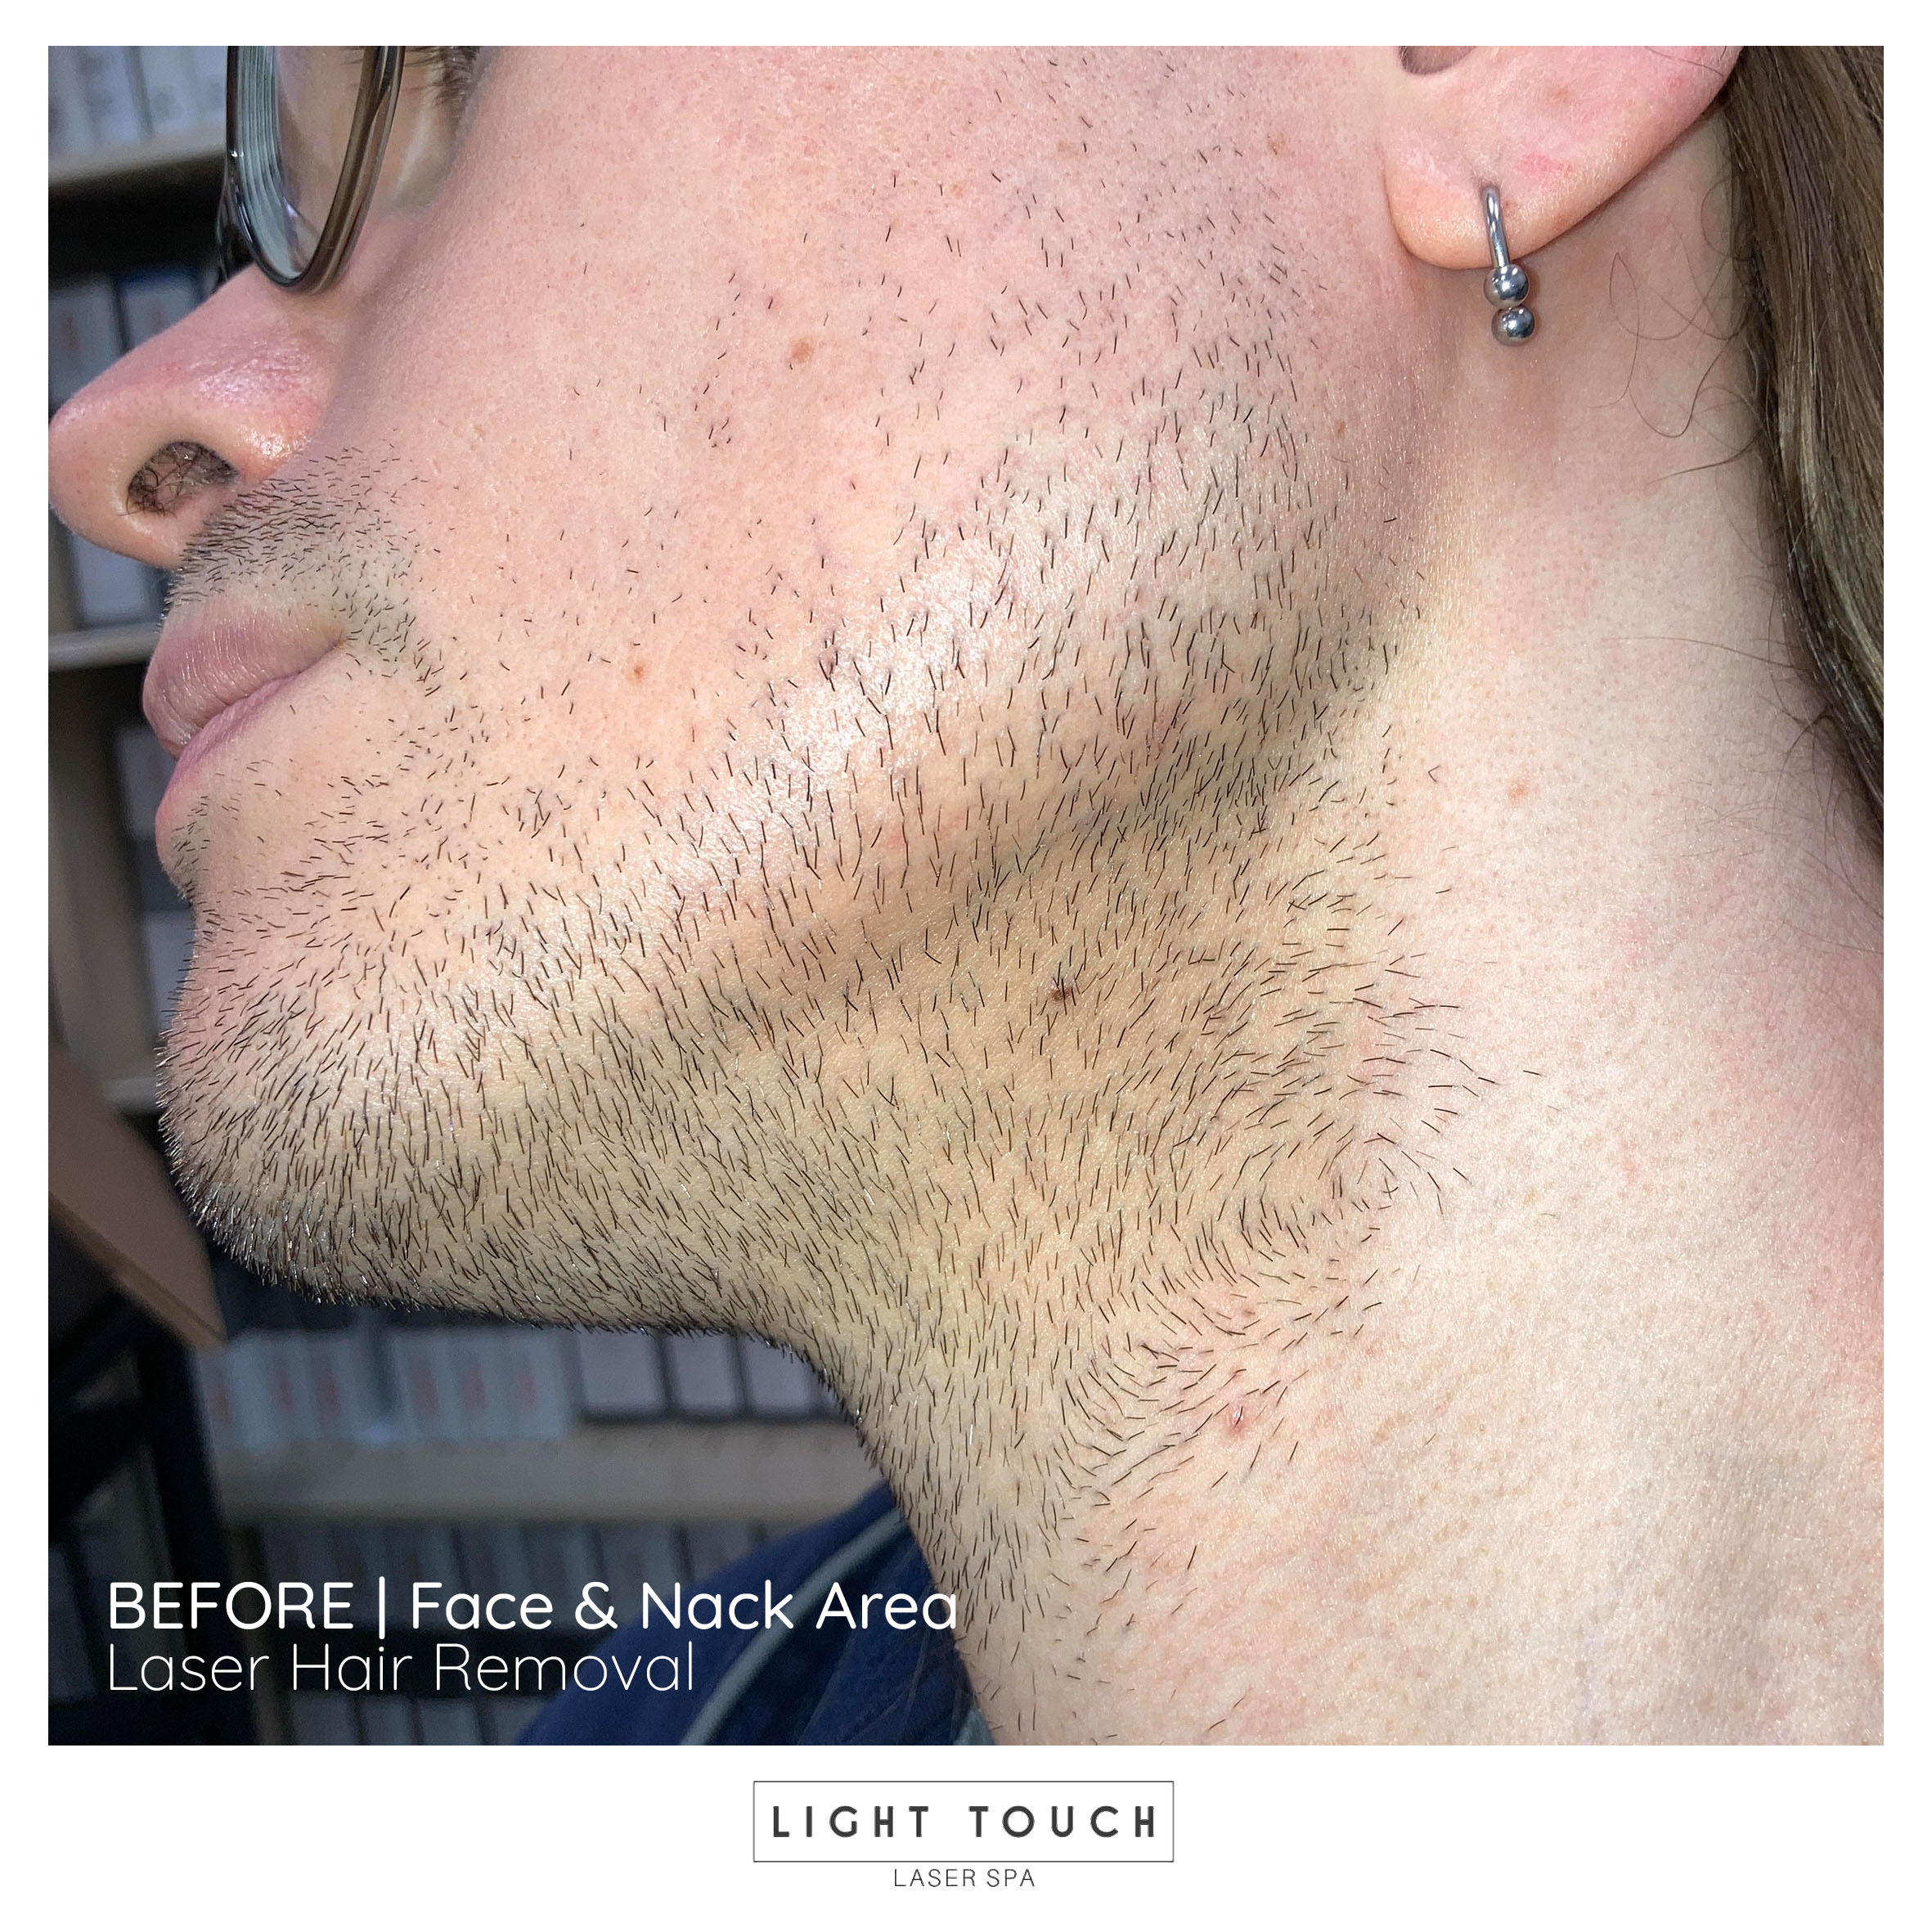 Laser hair removal treatment for transgender face and neck